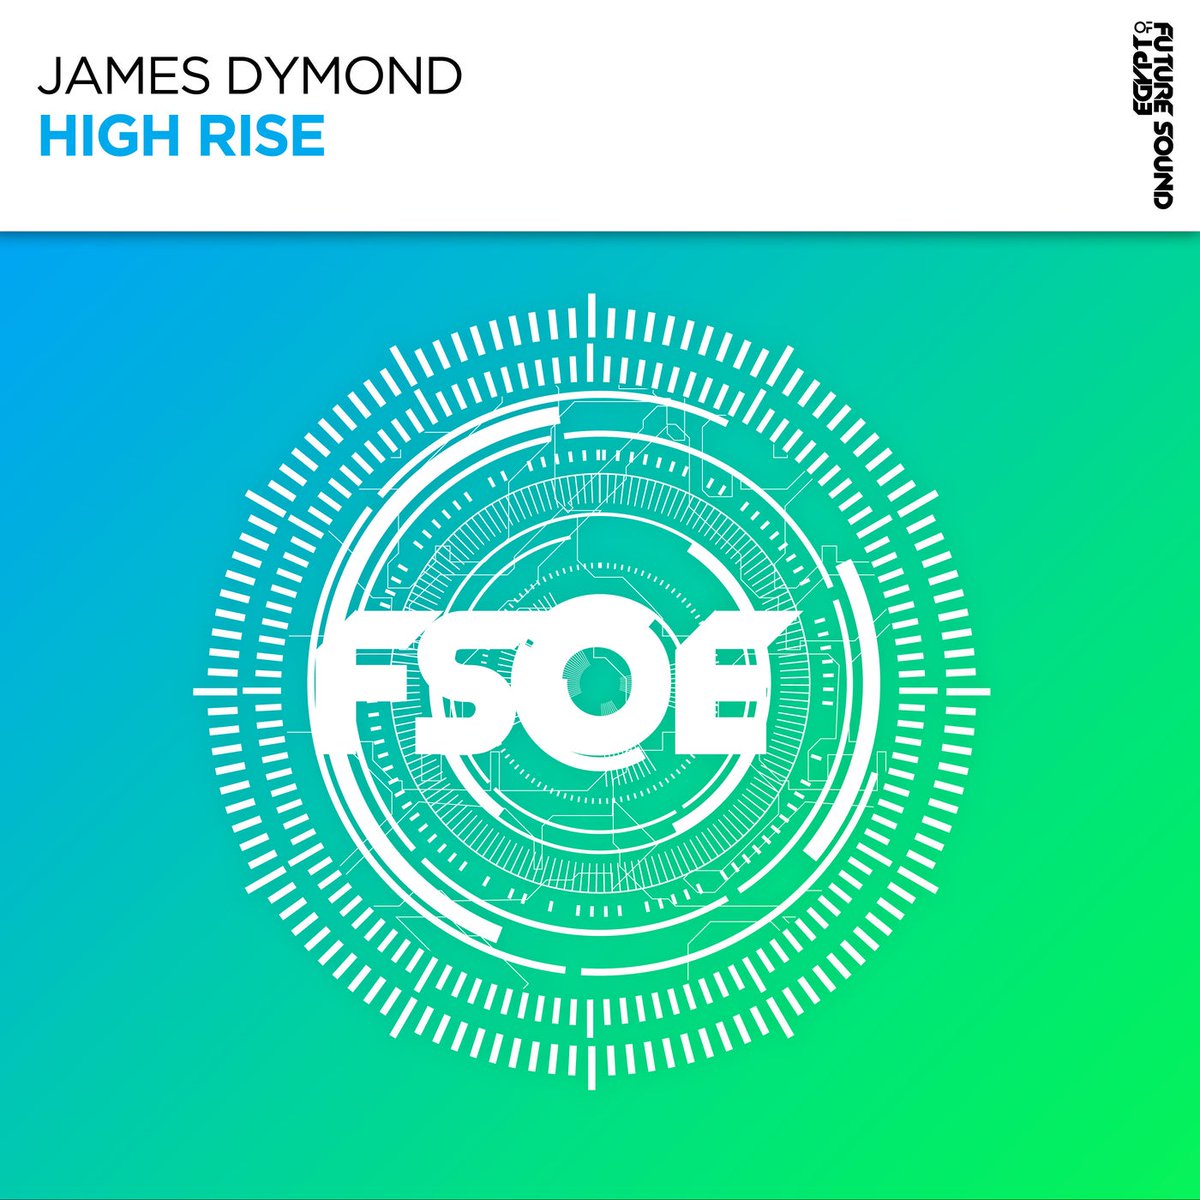 Flow Of Trance Ep 211 On @1mixTrance listen.1mix.co.uk 11. @James_Dymond - High Rise (Extended Mix) [@FsoeRecordings] #FlowOfTrance #Trance #UpliftingTrance #TranceFamily #EpicTrance #MelodicTrance #EuphoricTrance